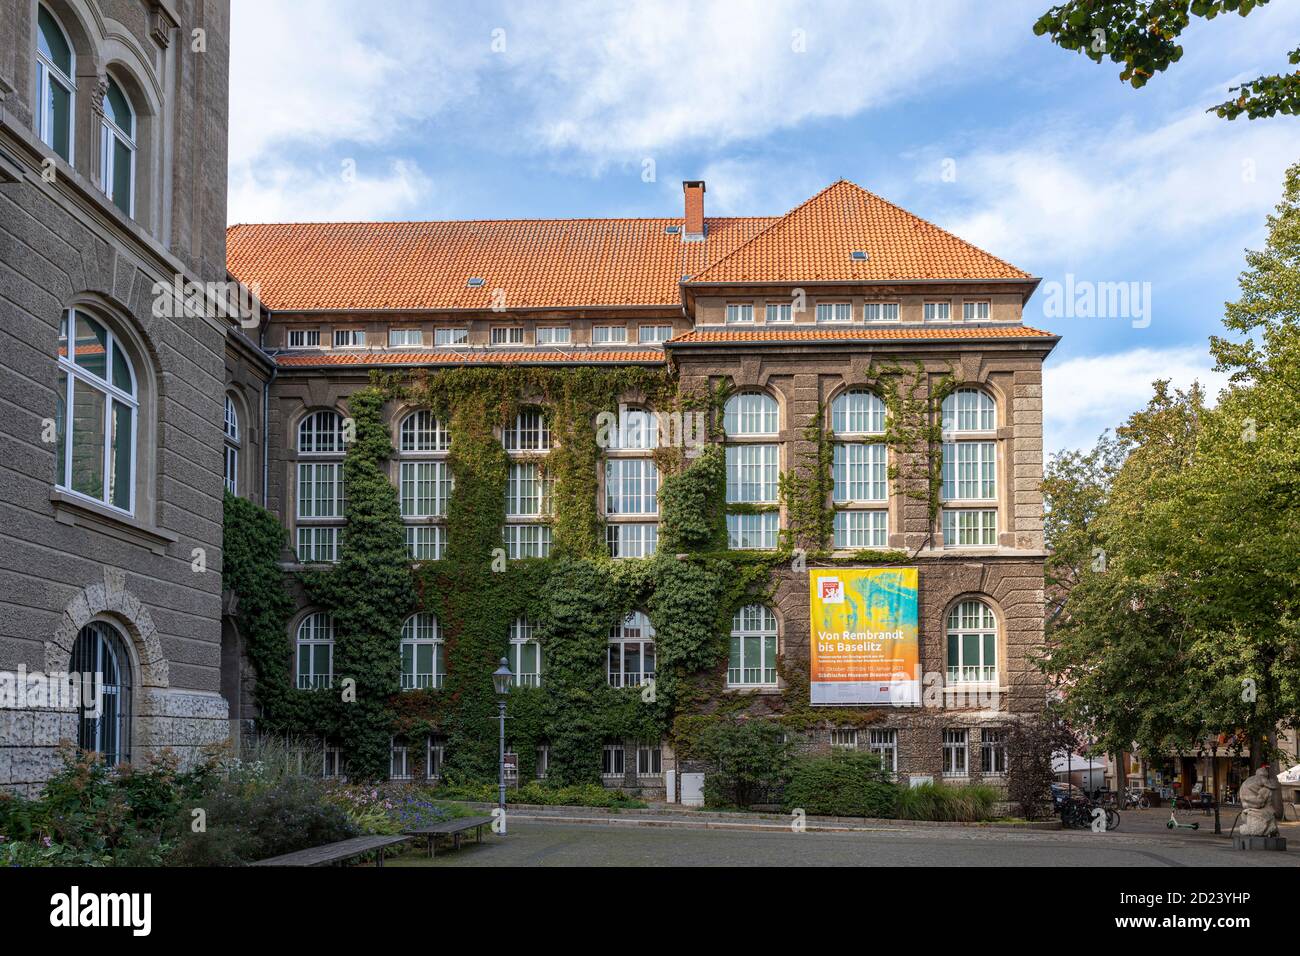 City museum of Braunschweig is one of biggest museums of cultural history in Germany. It's exhibition consists of over 270.000 objects. Stock Photo